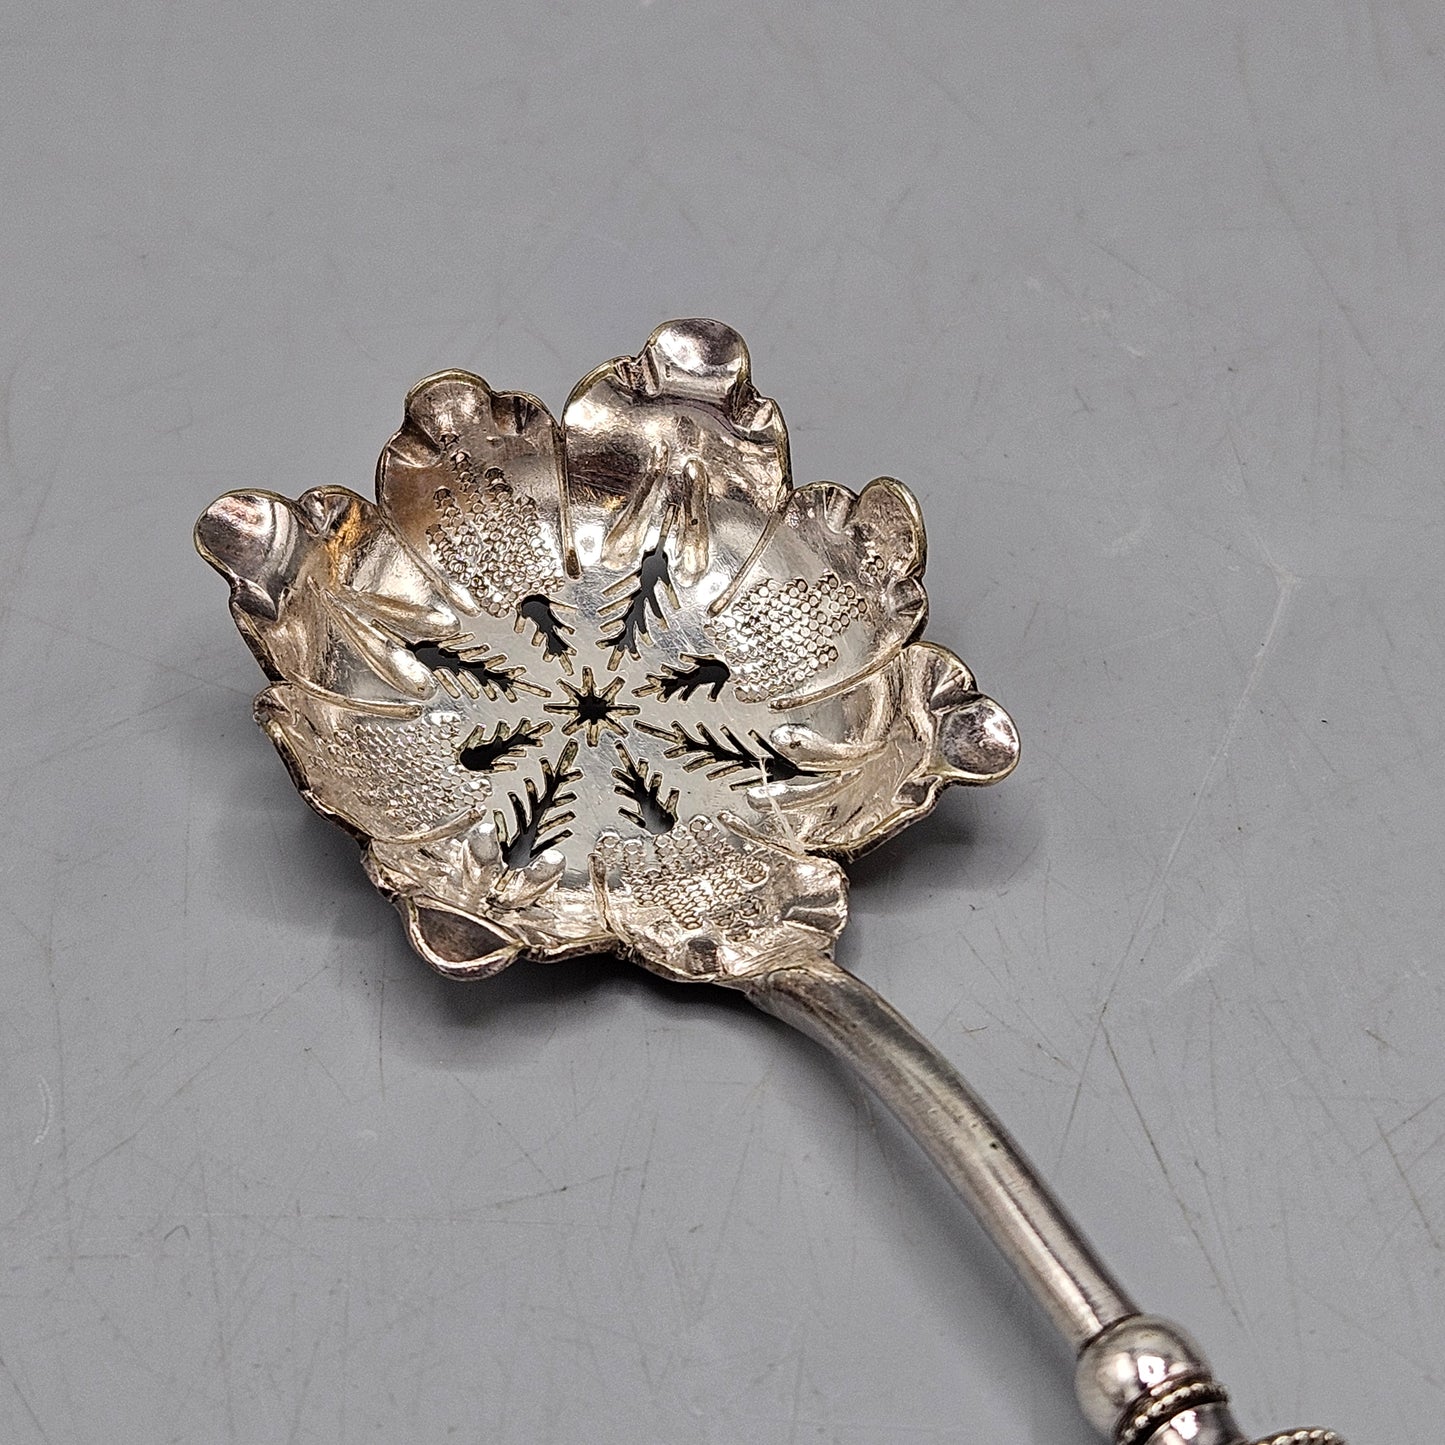 Vintage Decorative Serving Spoon with Mother of Pearl Handle